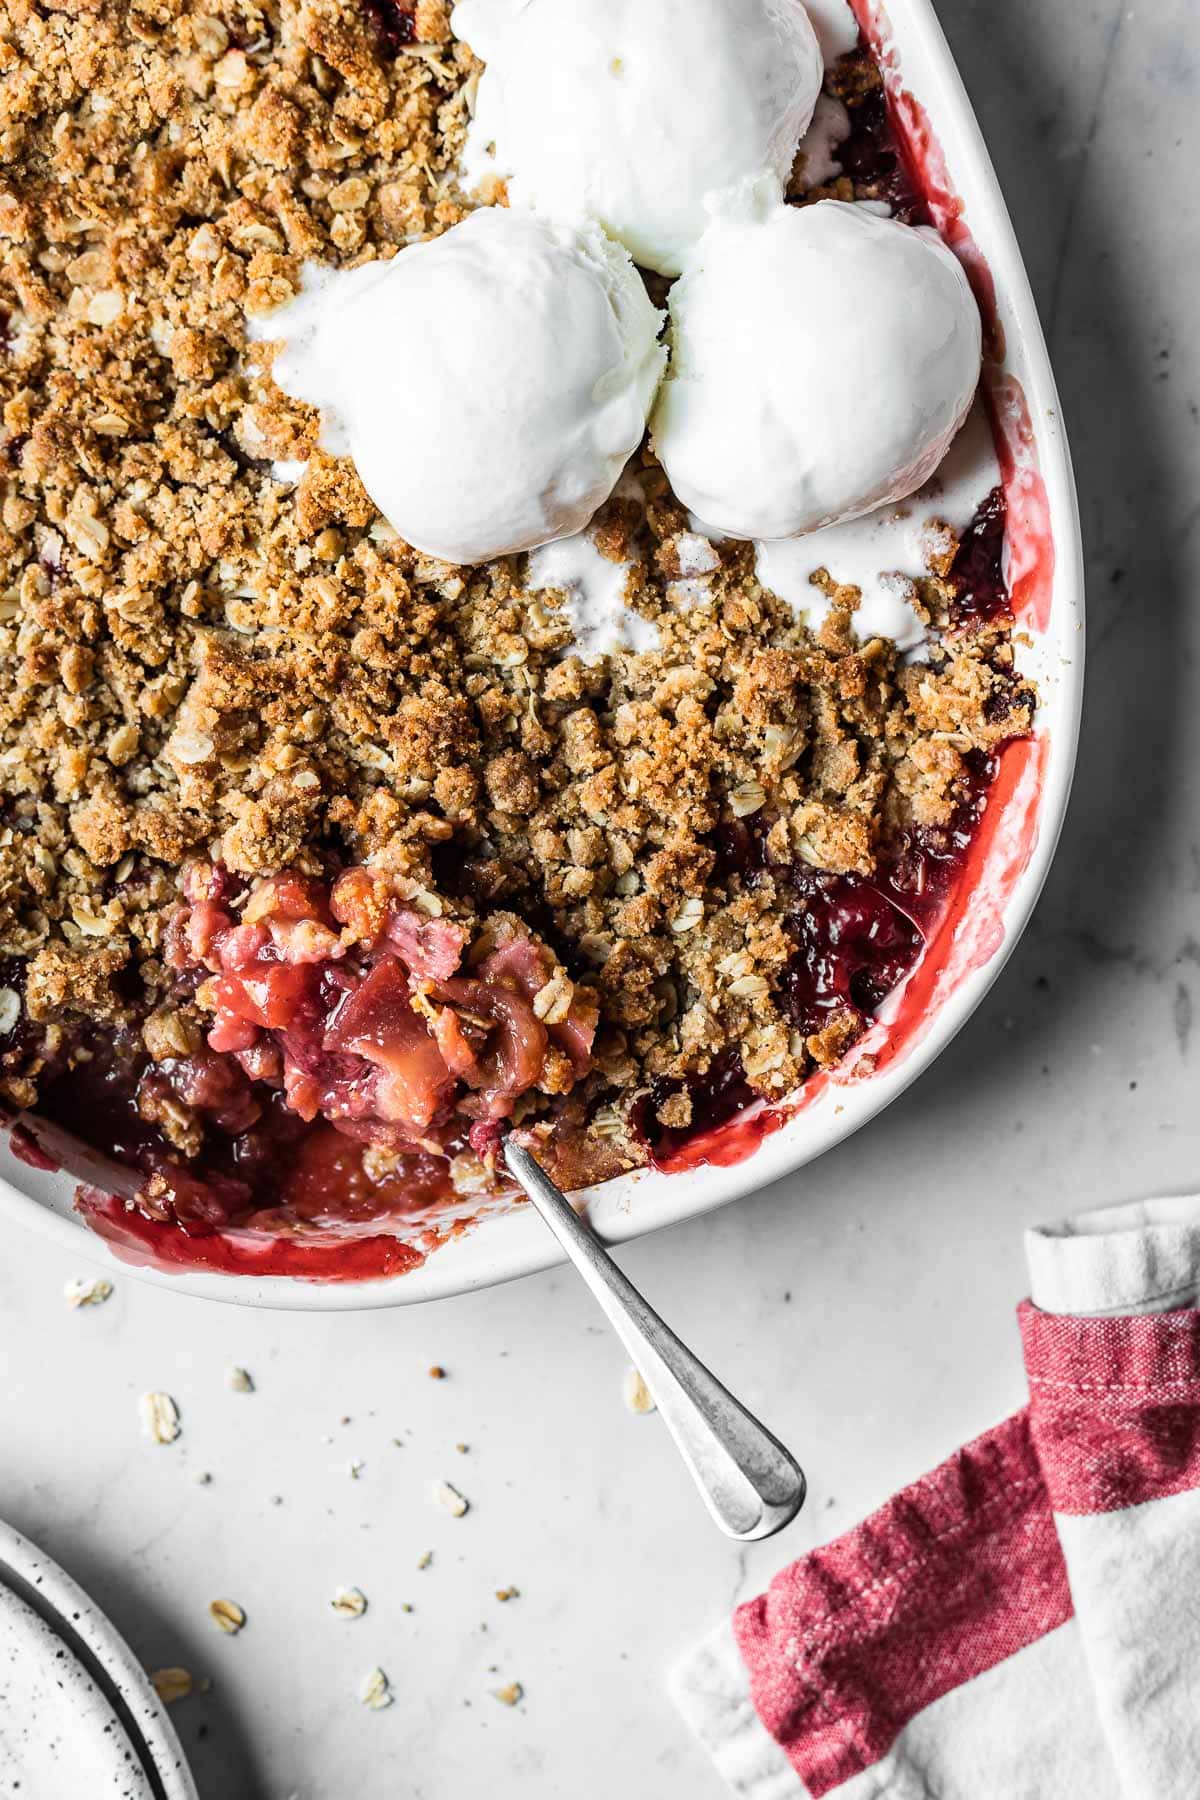 A white ceramic baking dish with a baked strawberry apple crisp topped with three scoops of vanilla ice cream. A spoon scooped into the crisp rests on the side of the dish.